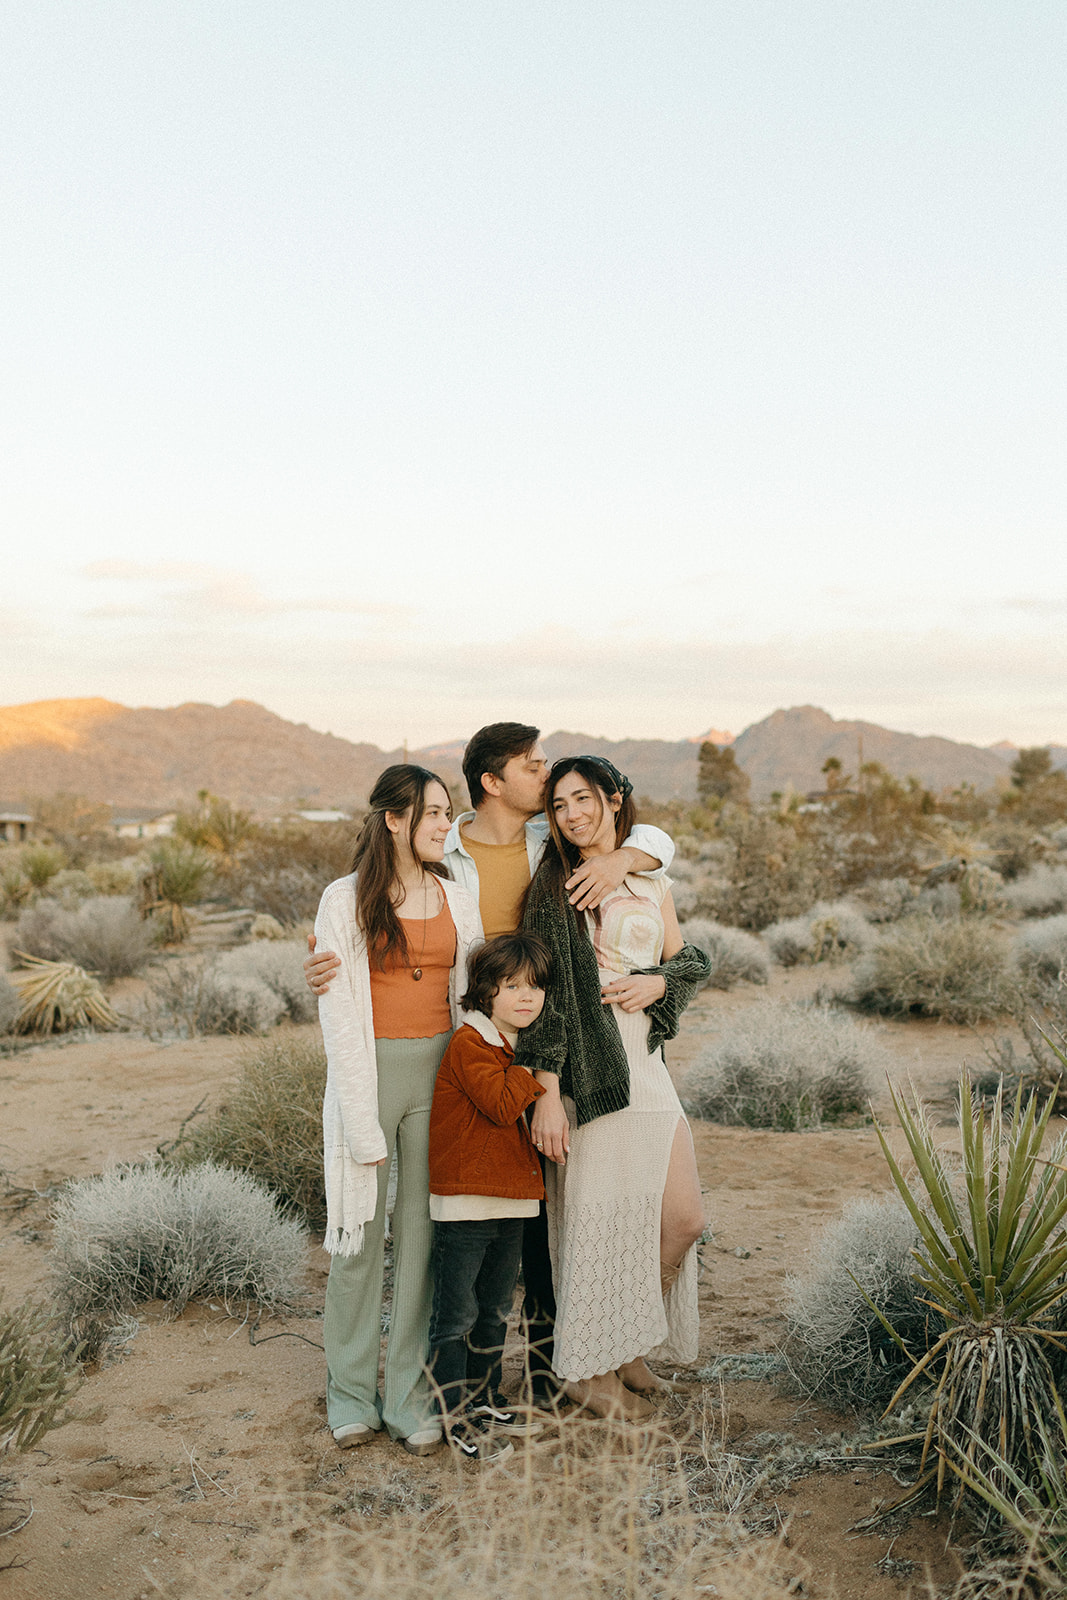 A family portrait session in Joshua Tree national park.